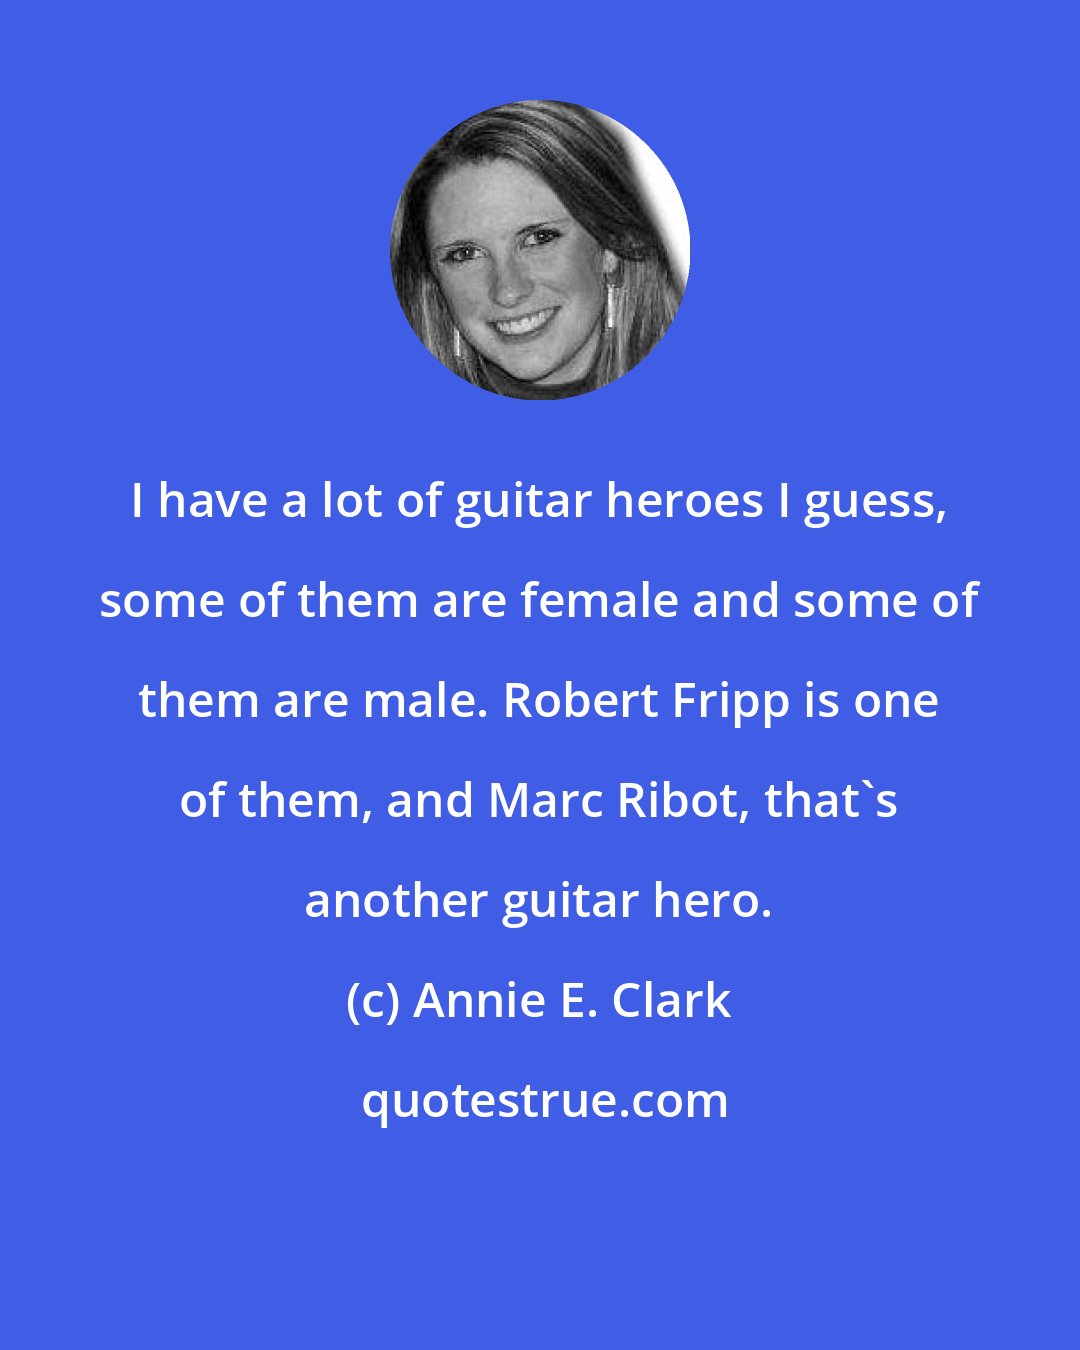 Annie E. Clark: I have a lot of guitar heroes I guess, some of them are female and some of them are male. Robert Fripp is one of them, and Marc Ribot, that's another guitar hero.